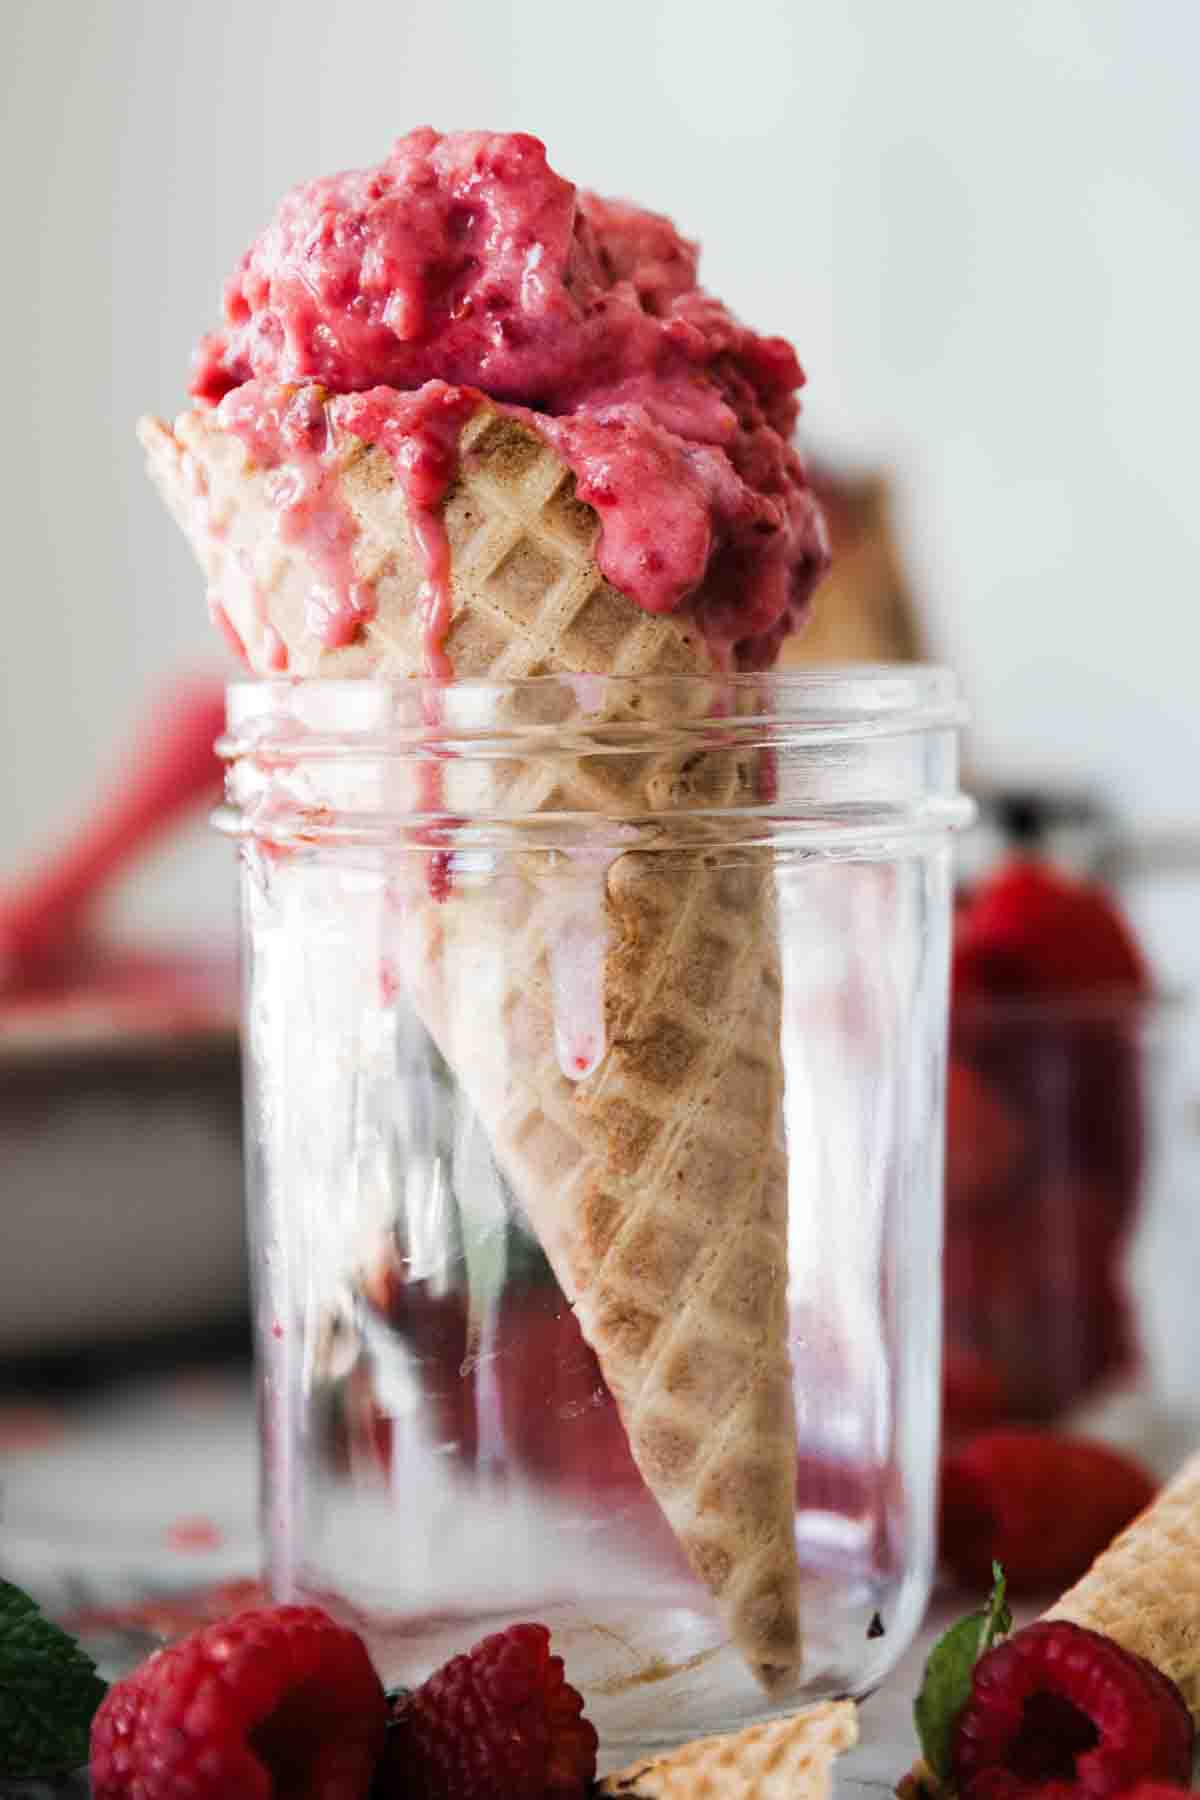 A raspberry sherbet ice cream cone in a glass jar on the table.